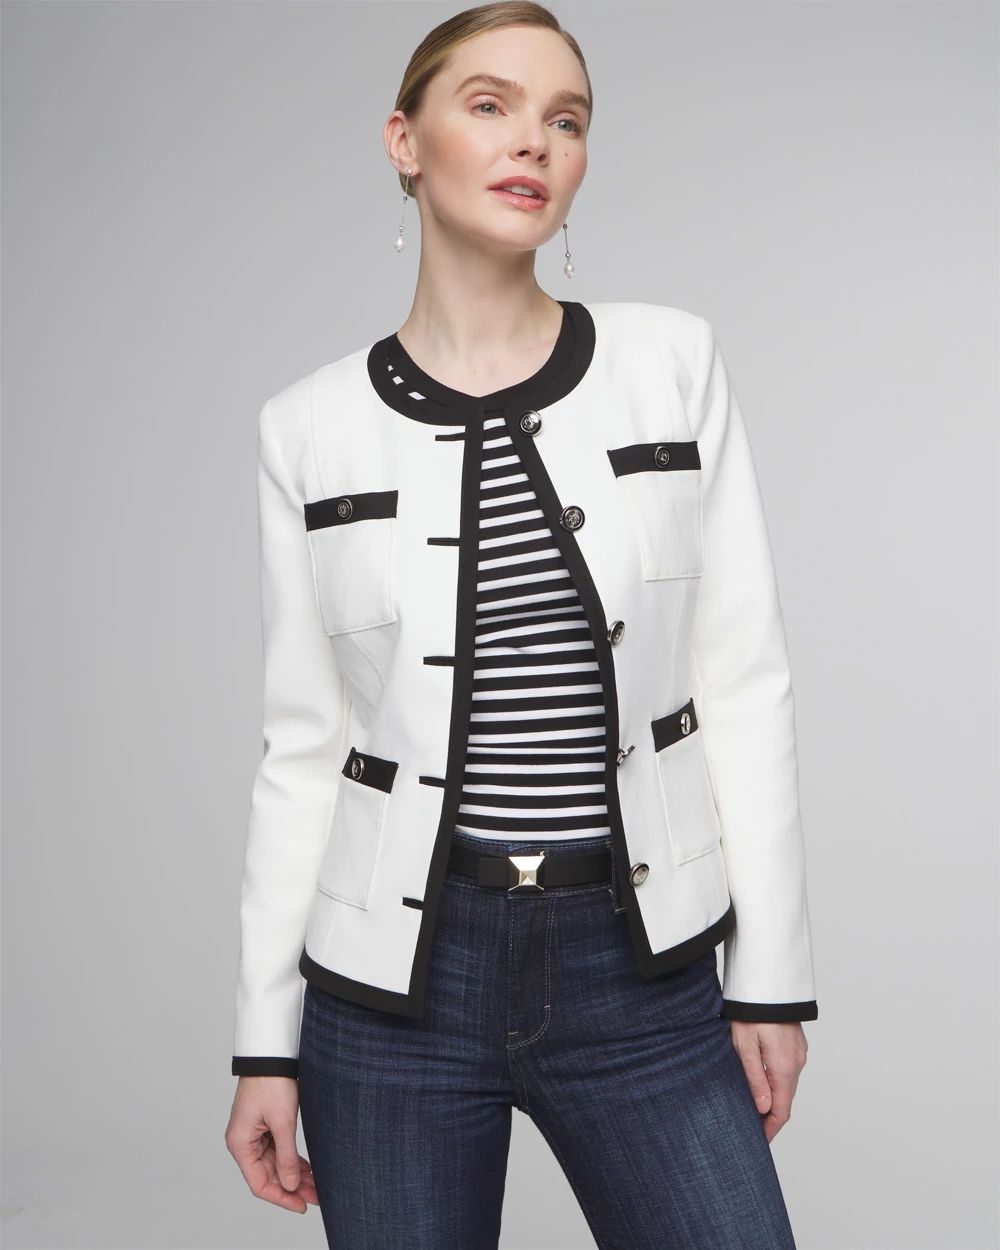 WHBM® Colorblock Stylist Jacket click to view larger image.